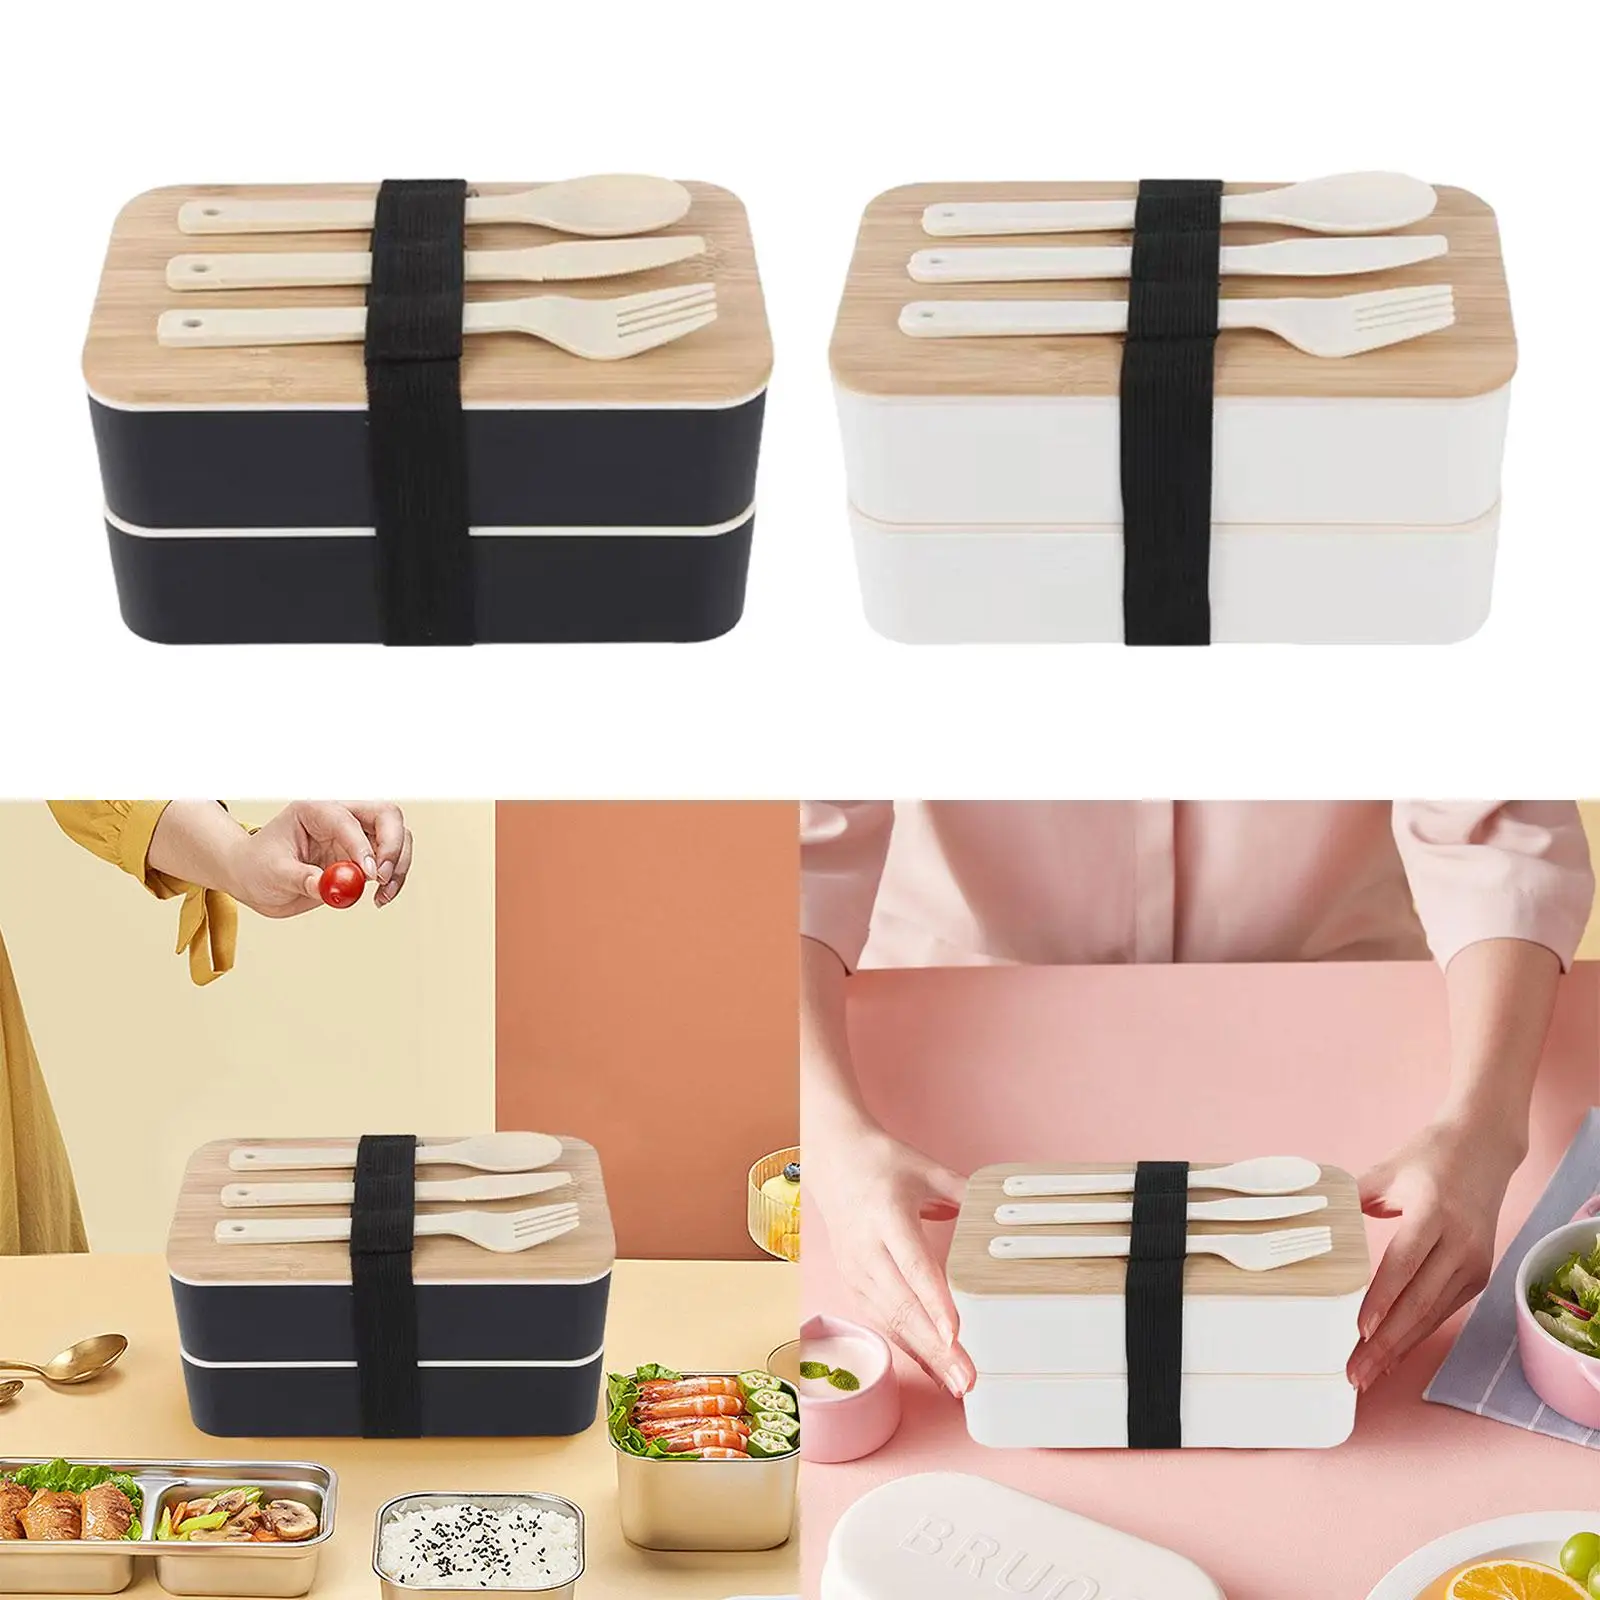 Bento Box Portable Tableware Bowl Eastic Band Snack Serving Box Lunch Container for Hiking Restaurant Travel Picnics Climbing